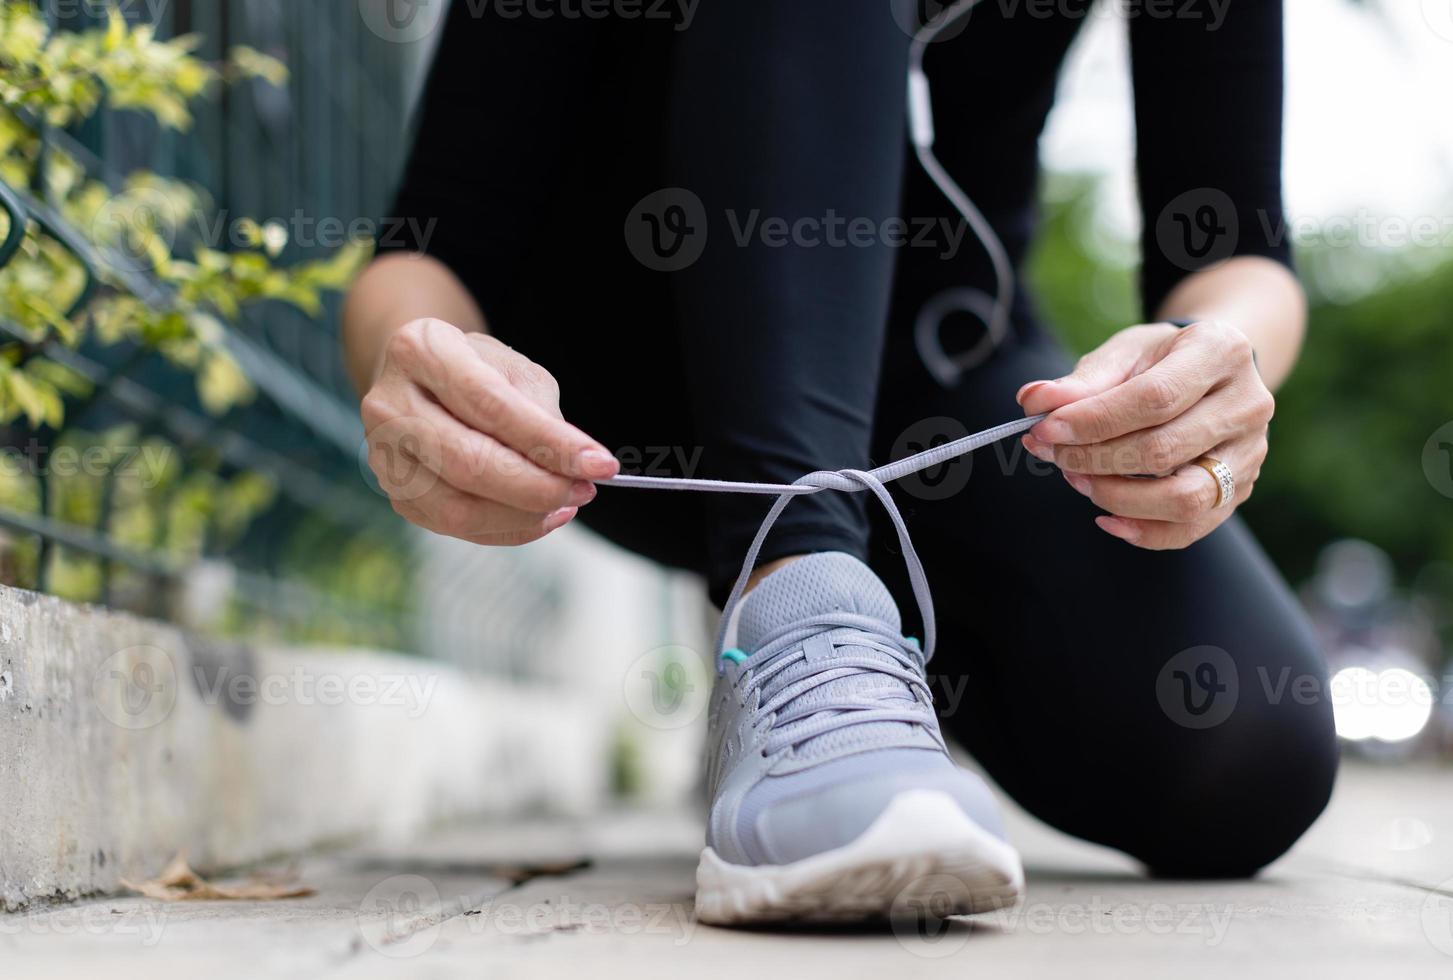 Crop unrecognizable woman runner wearing hygiene protective face mask sitting and tieing shoe rope during workout running in city park. Concept of healthcare in time of coronavirus outbreak photo